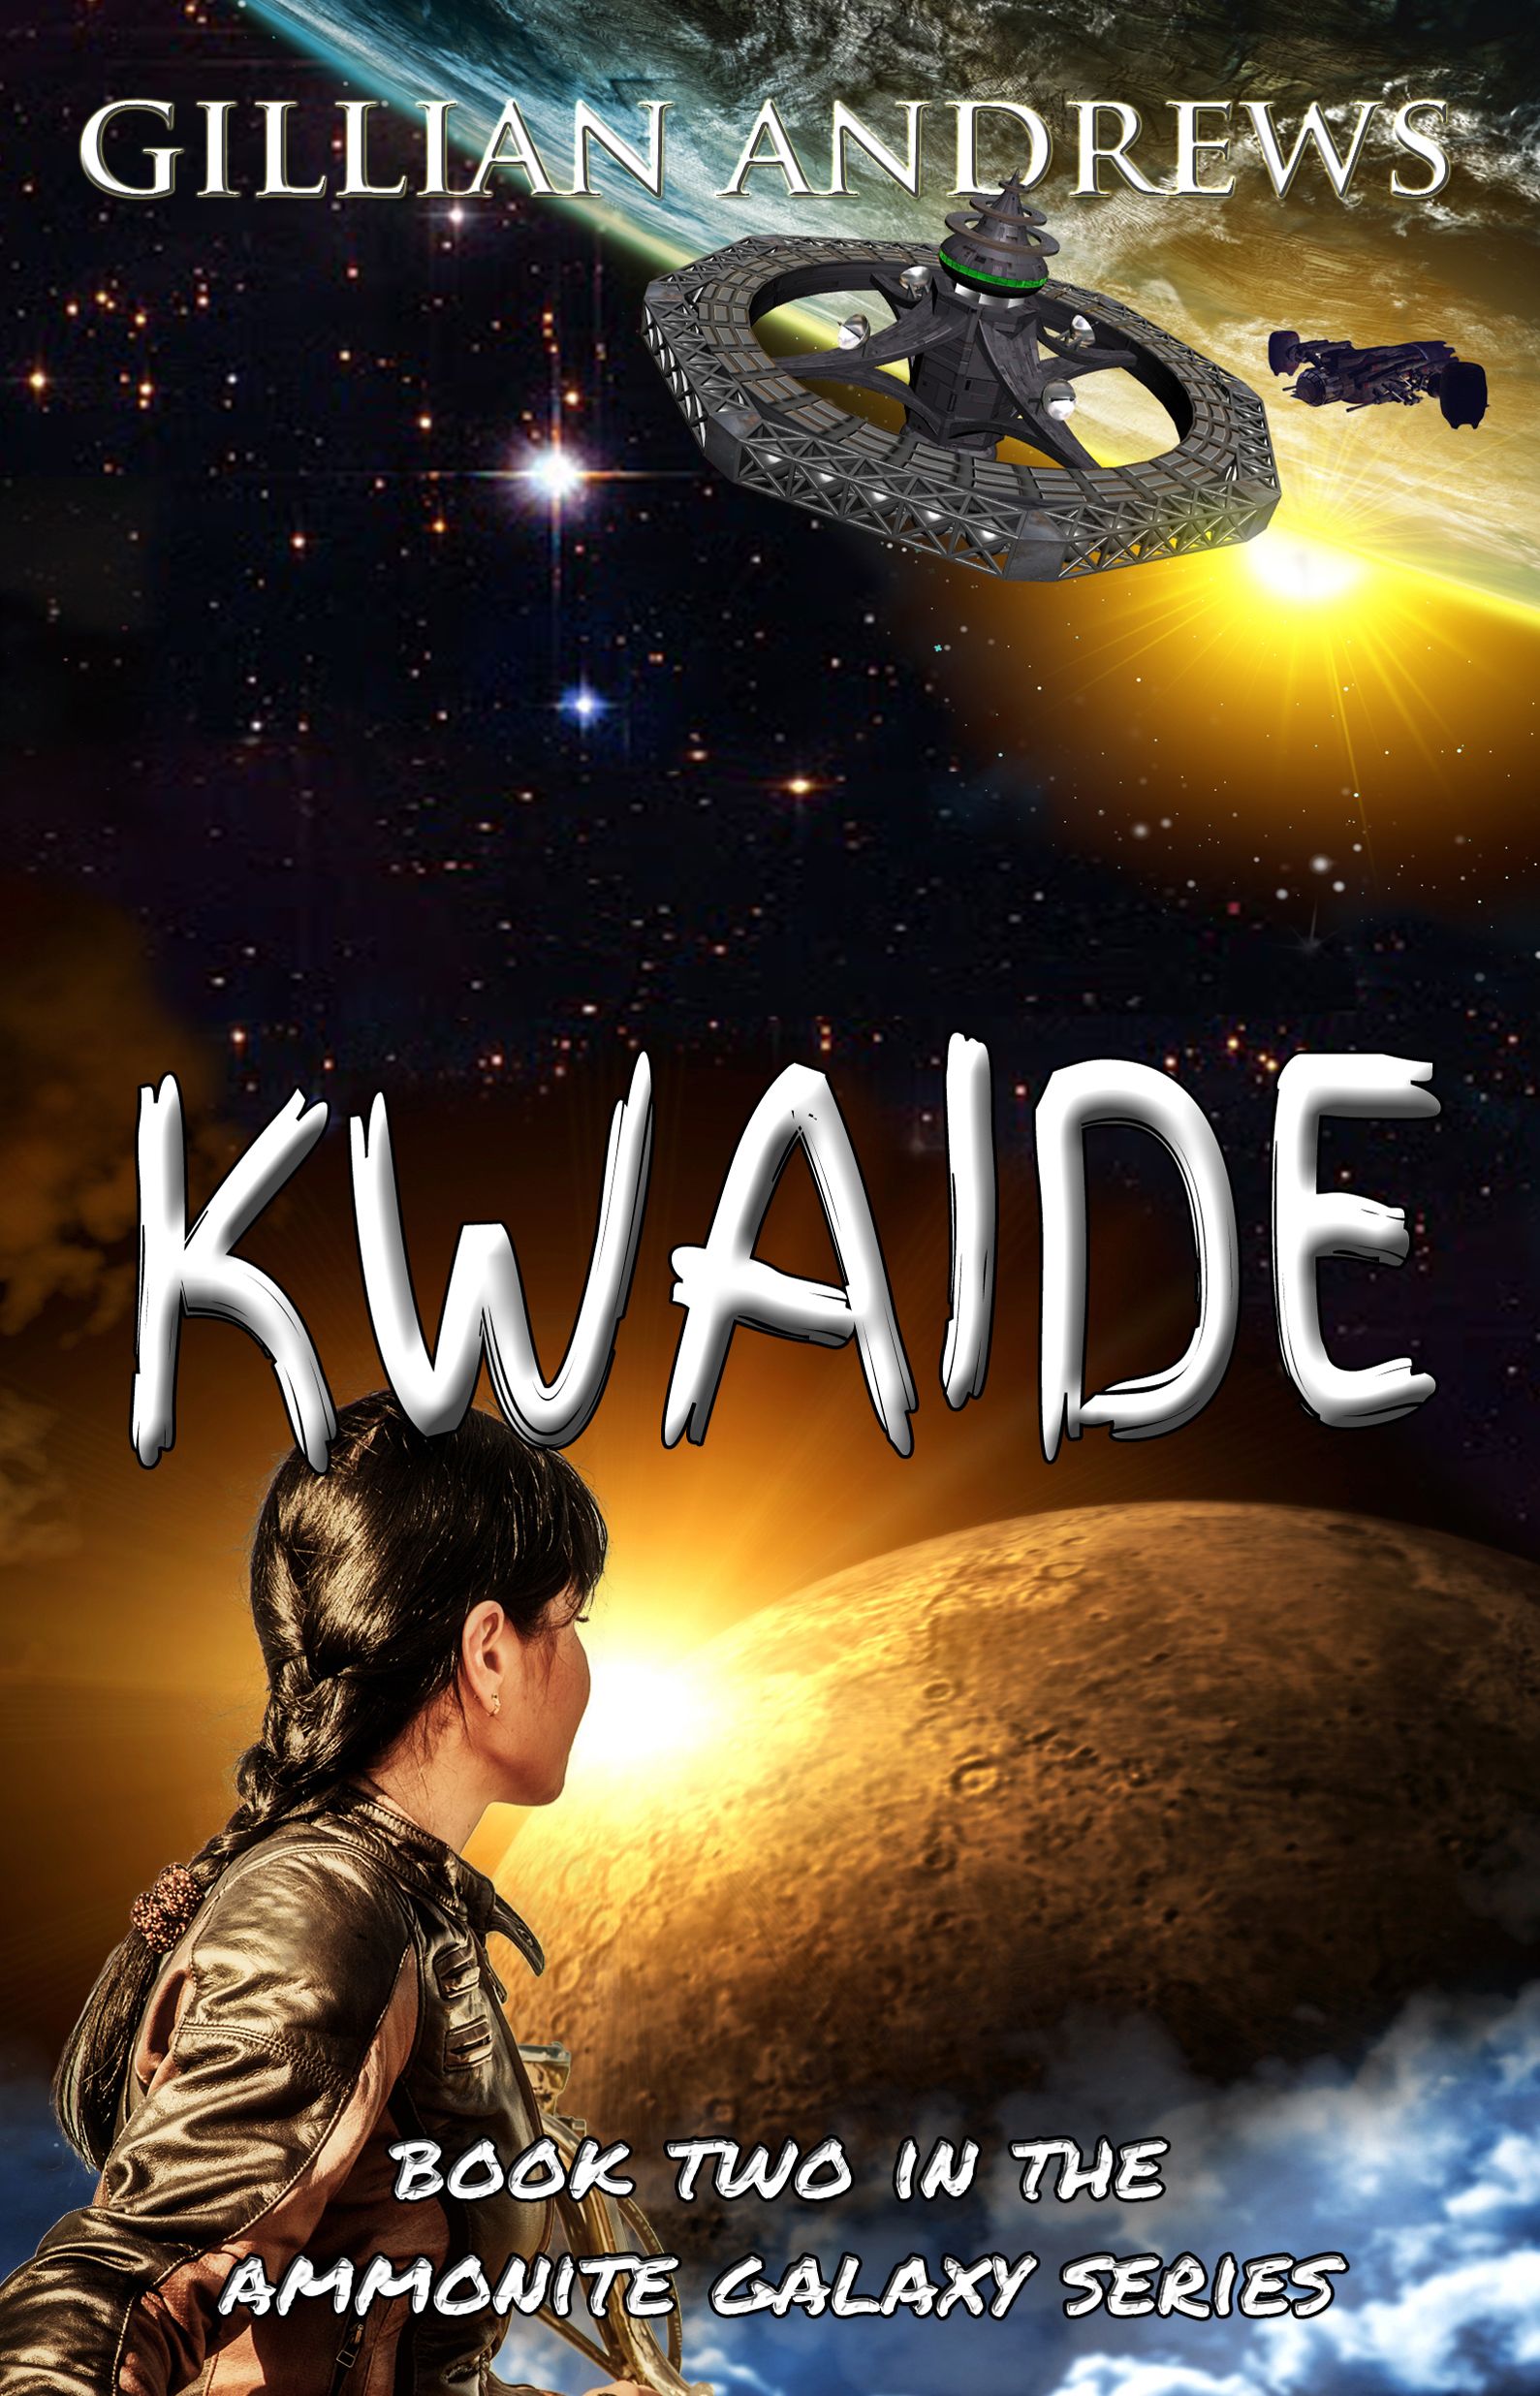 Full cover for Kwaide, Second book in the Ammonite Galaxy series.